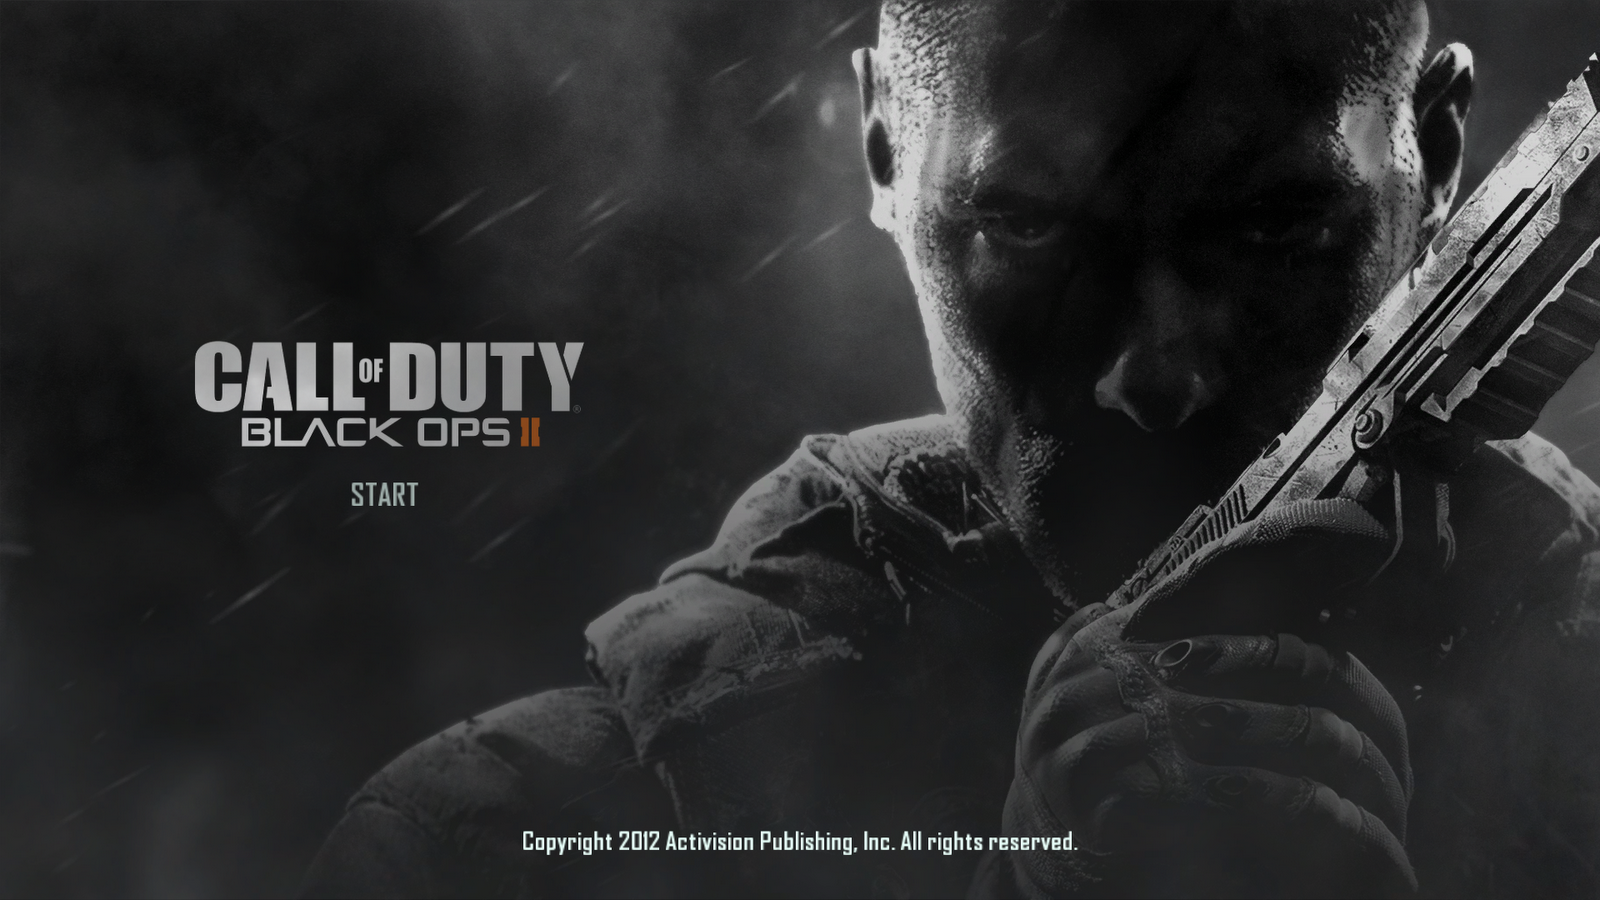  8iSkuKFDbsYs1600Call of duty black ops 2 wallpapers hd2png